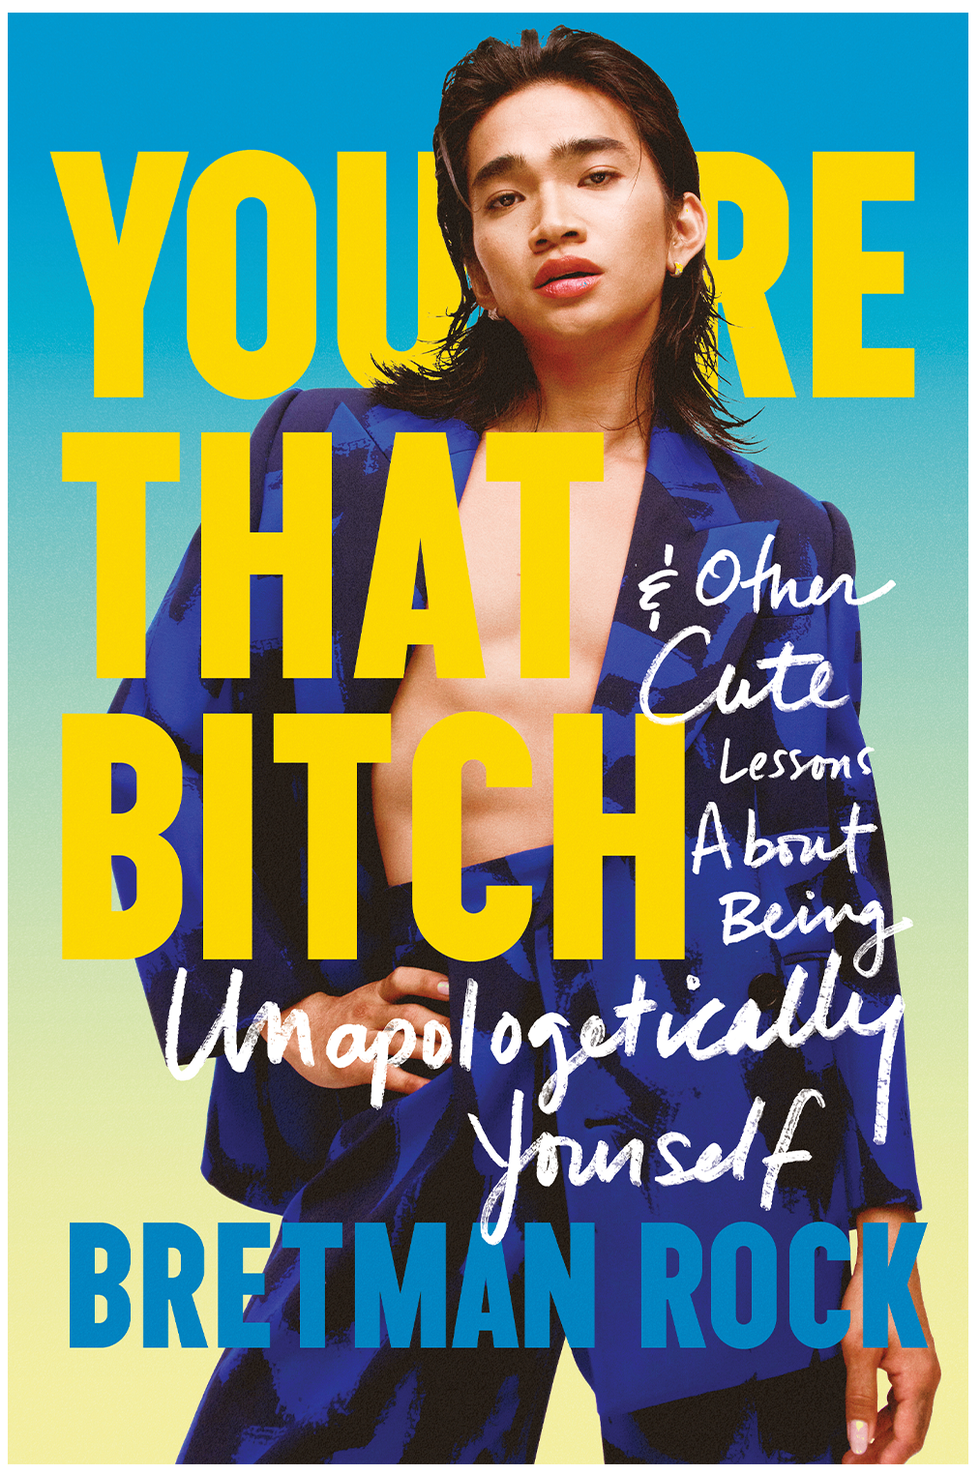 you’re that bitch other cute lessons about being unapologetically yourself